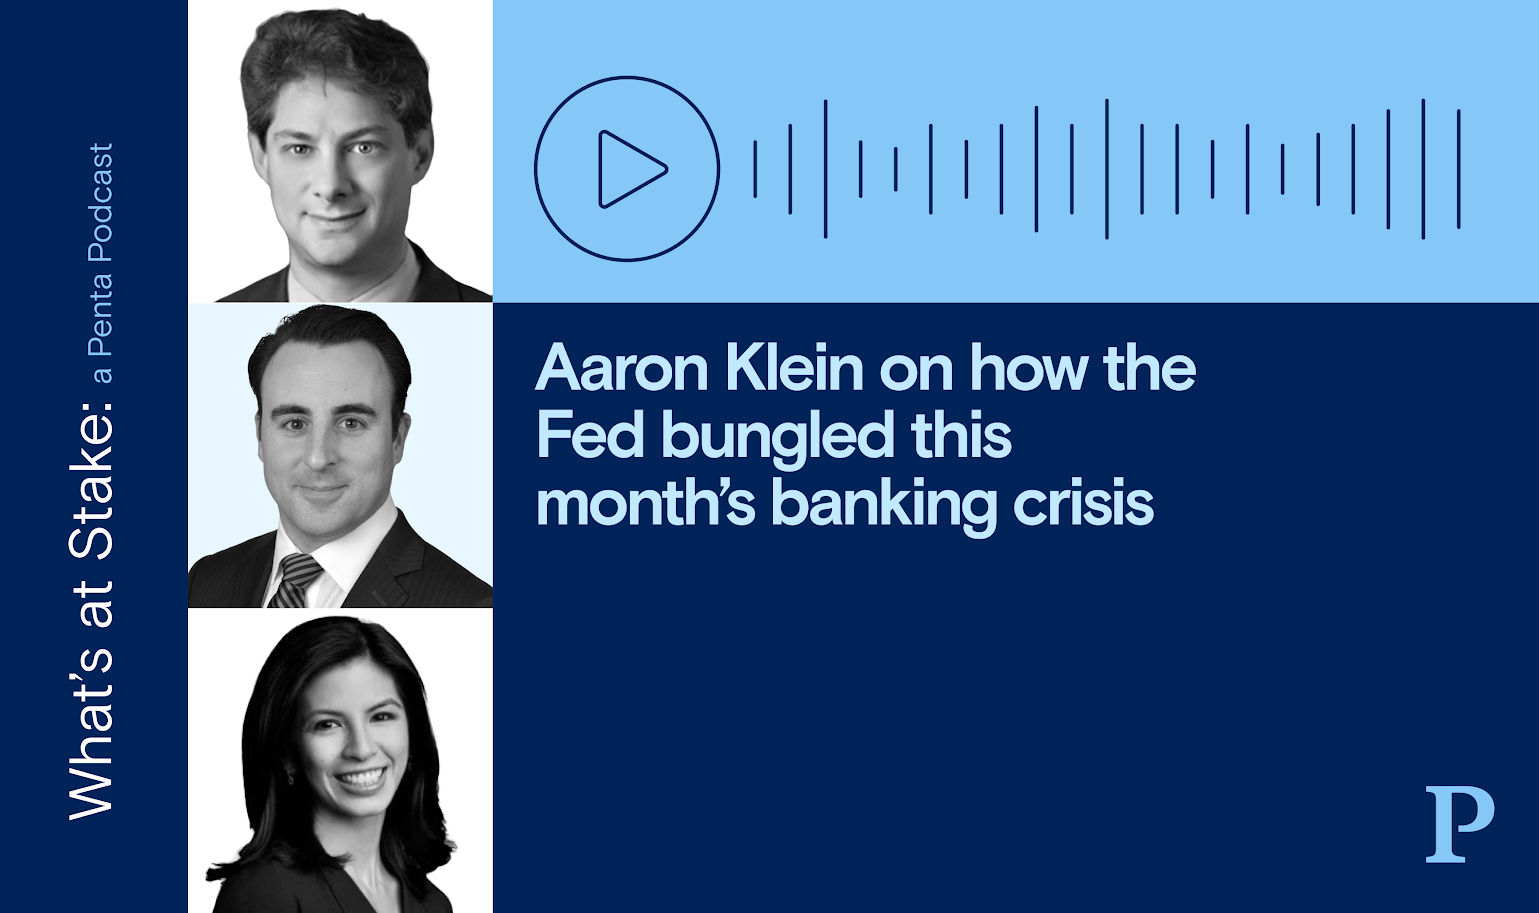 Aaron Klein on how the Fed bungled this month’s banking crisis